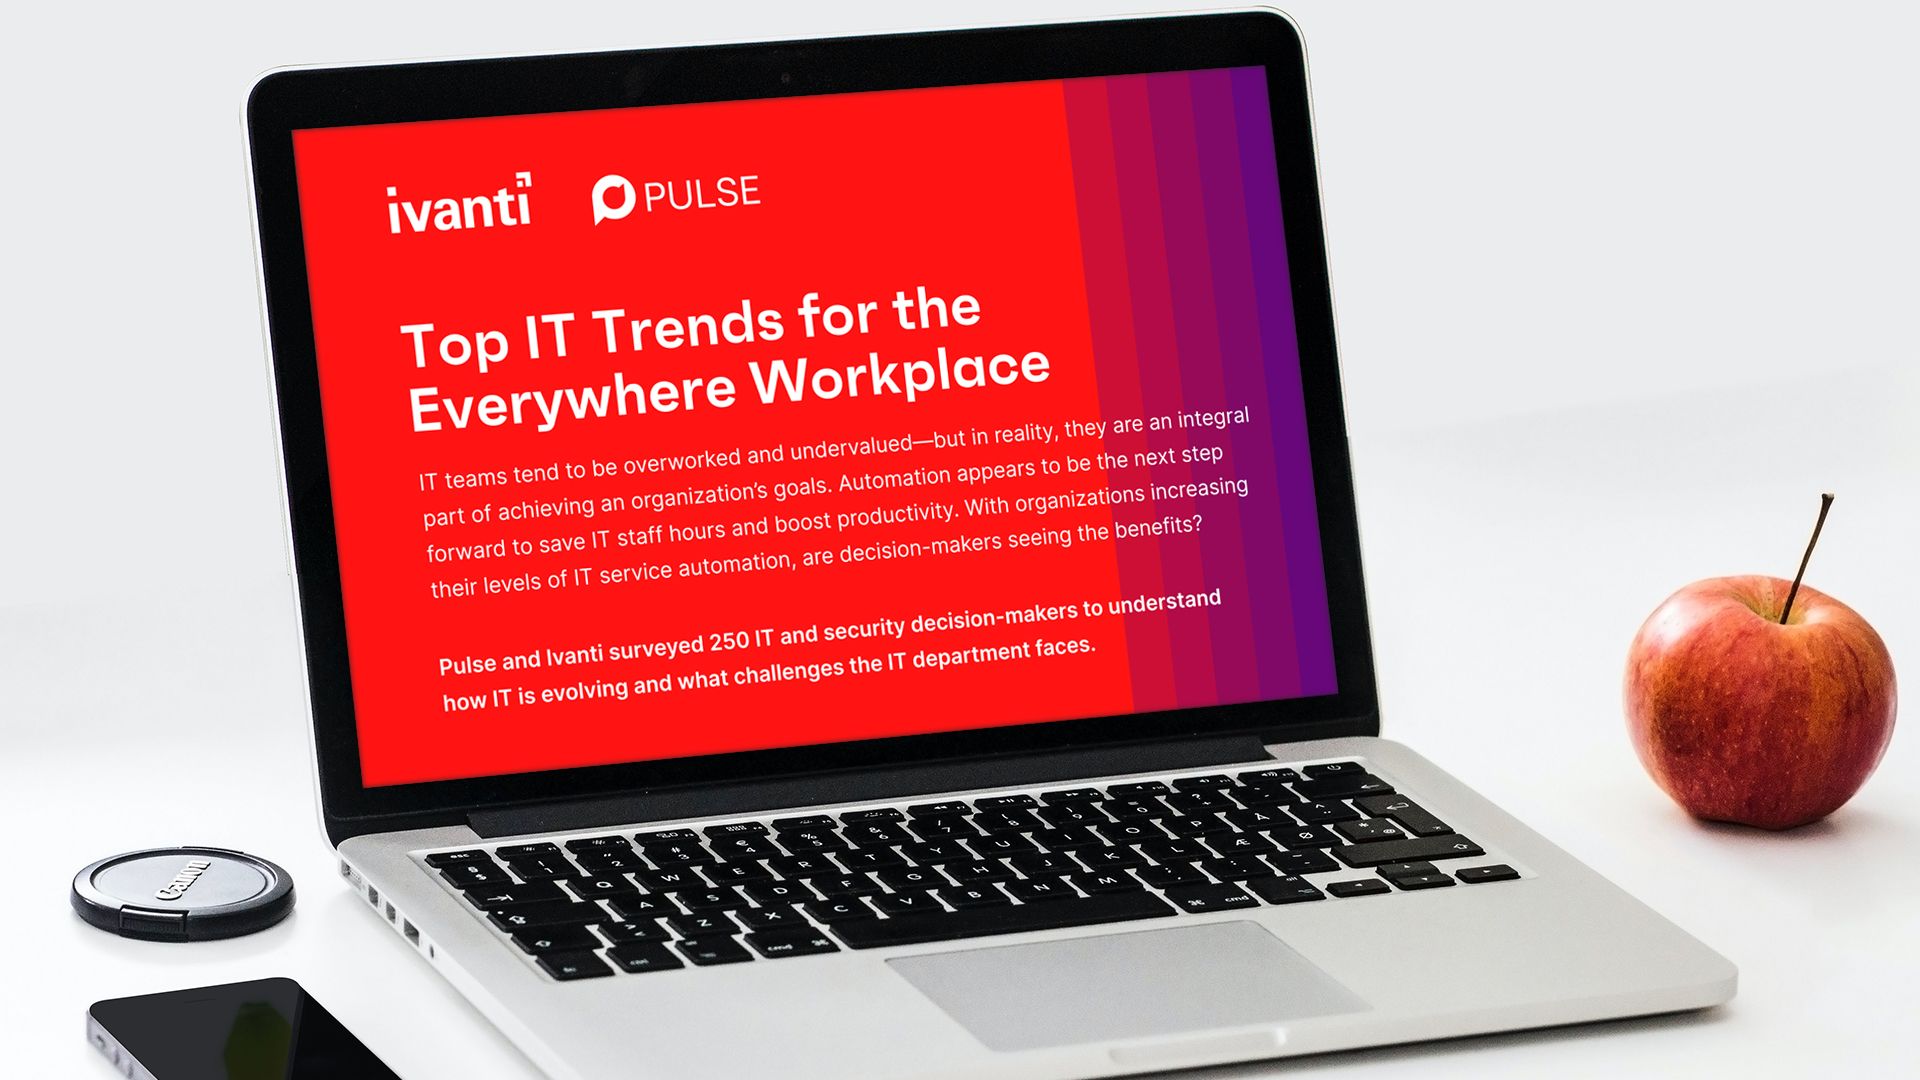 Top IT trends for the ‘everywhere workplace’